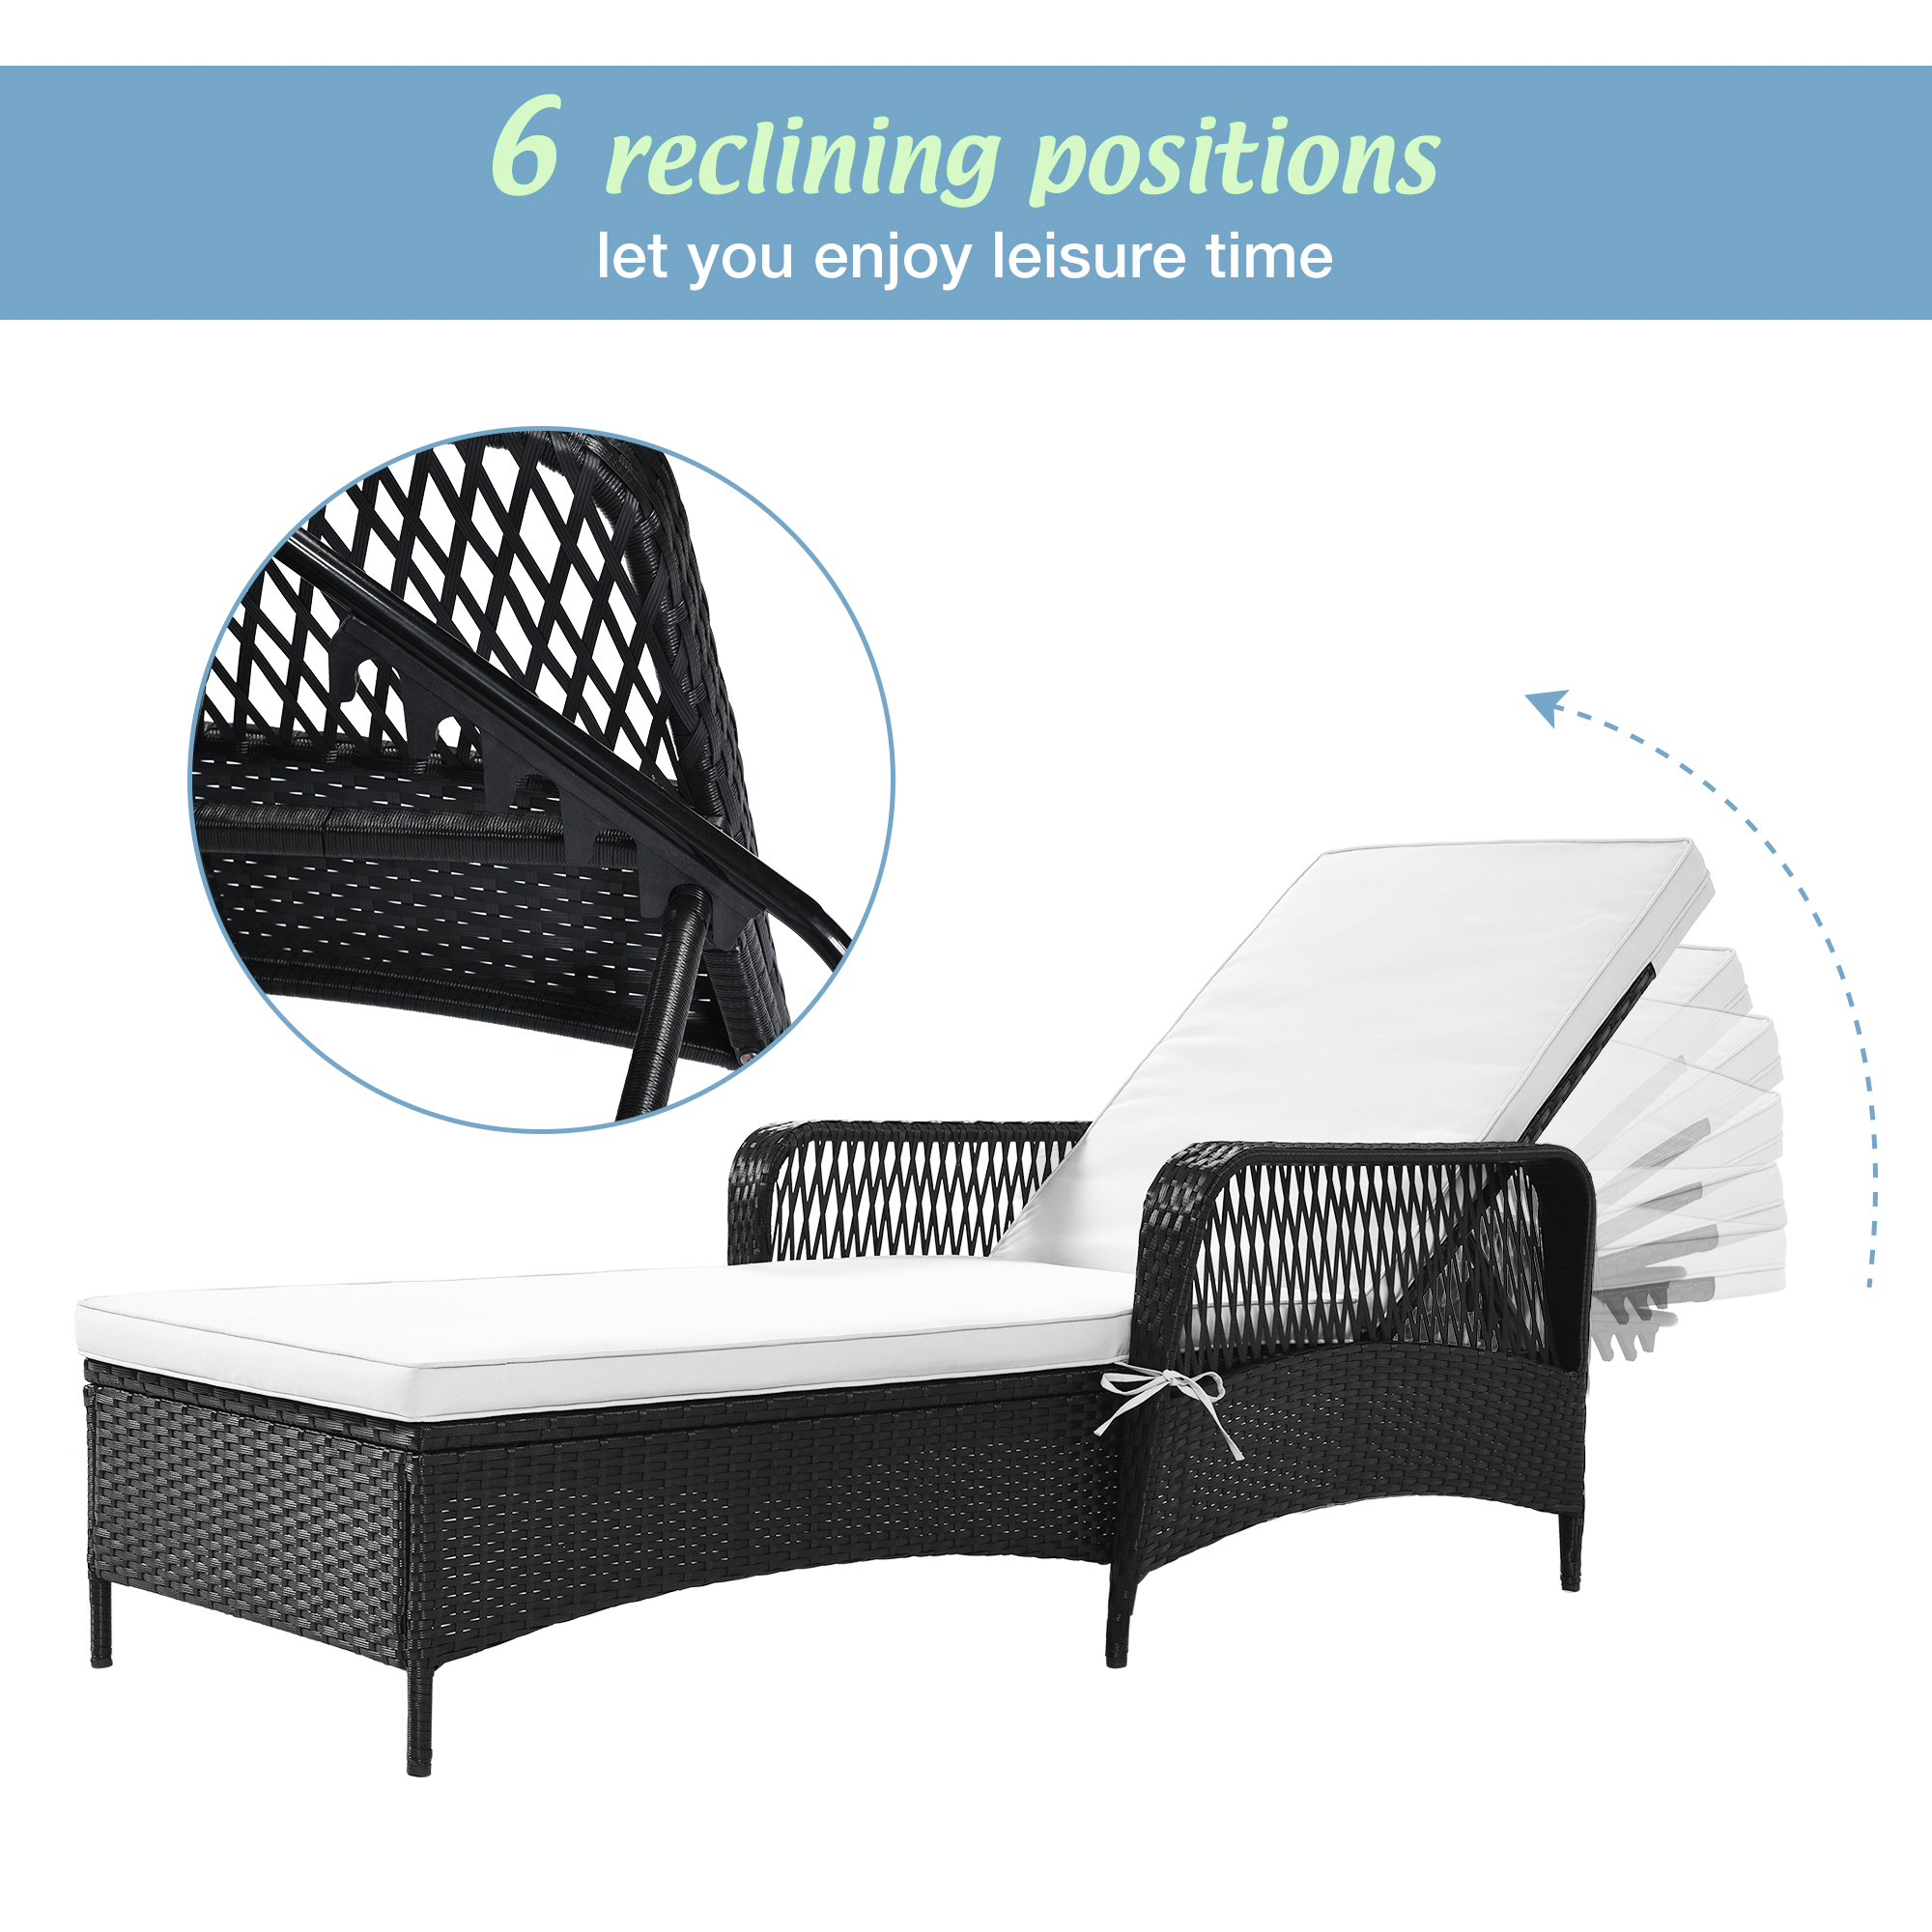 Sesslife Chaise Lounge Chair for Outside, Rattan Wicker Outdoor Lounge Chair, Adjustable Pool Lounge Chair with Thickened Cushion for Patio Poolside Deck - image 5 of 10